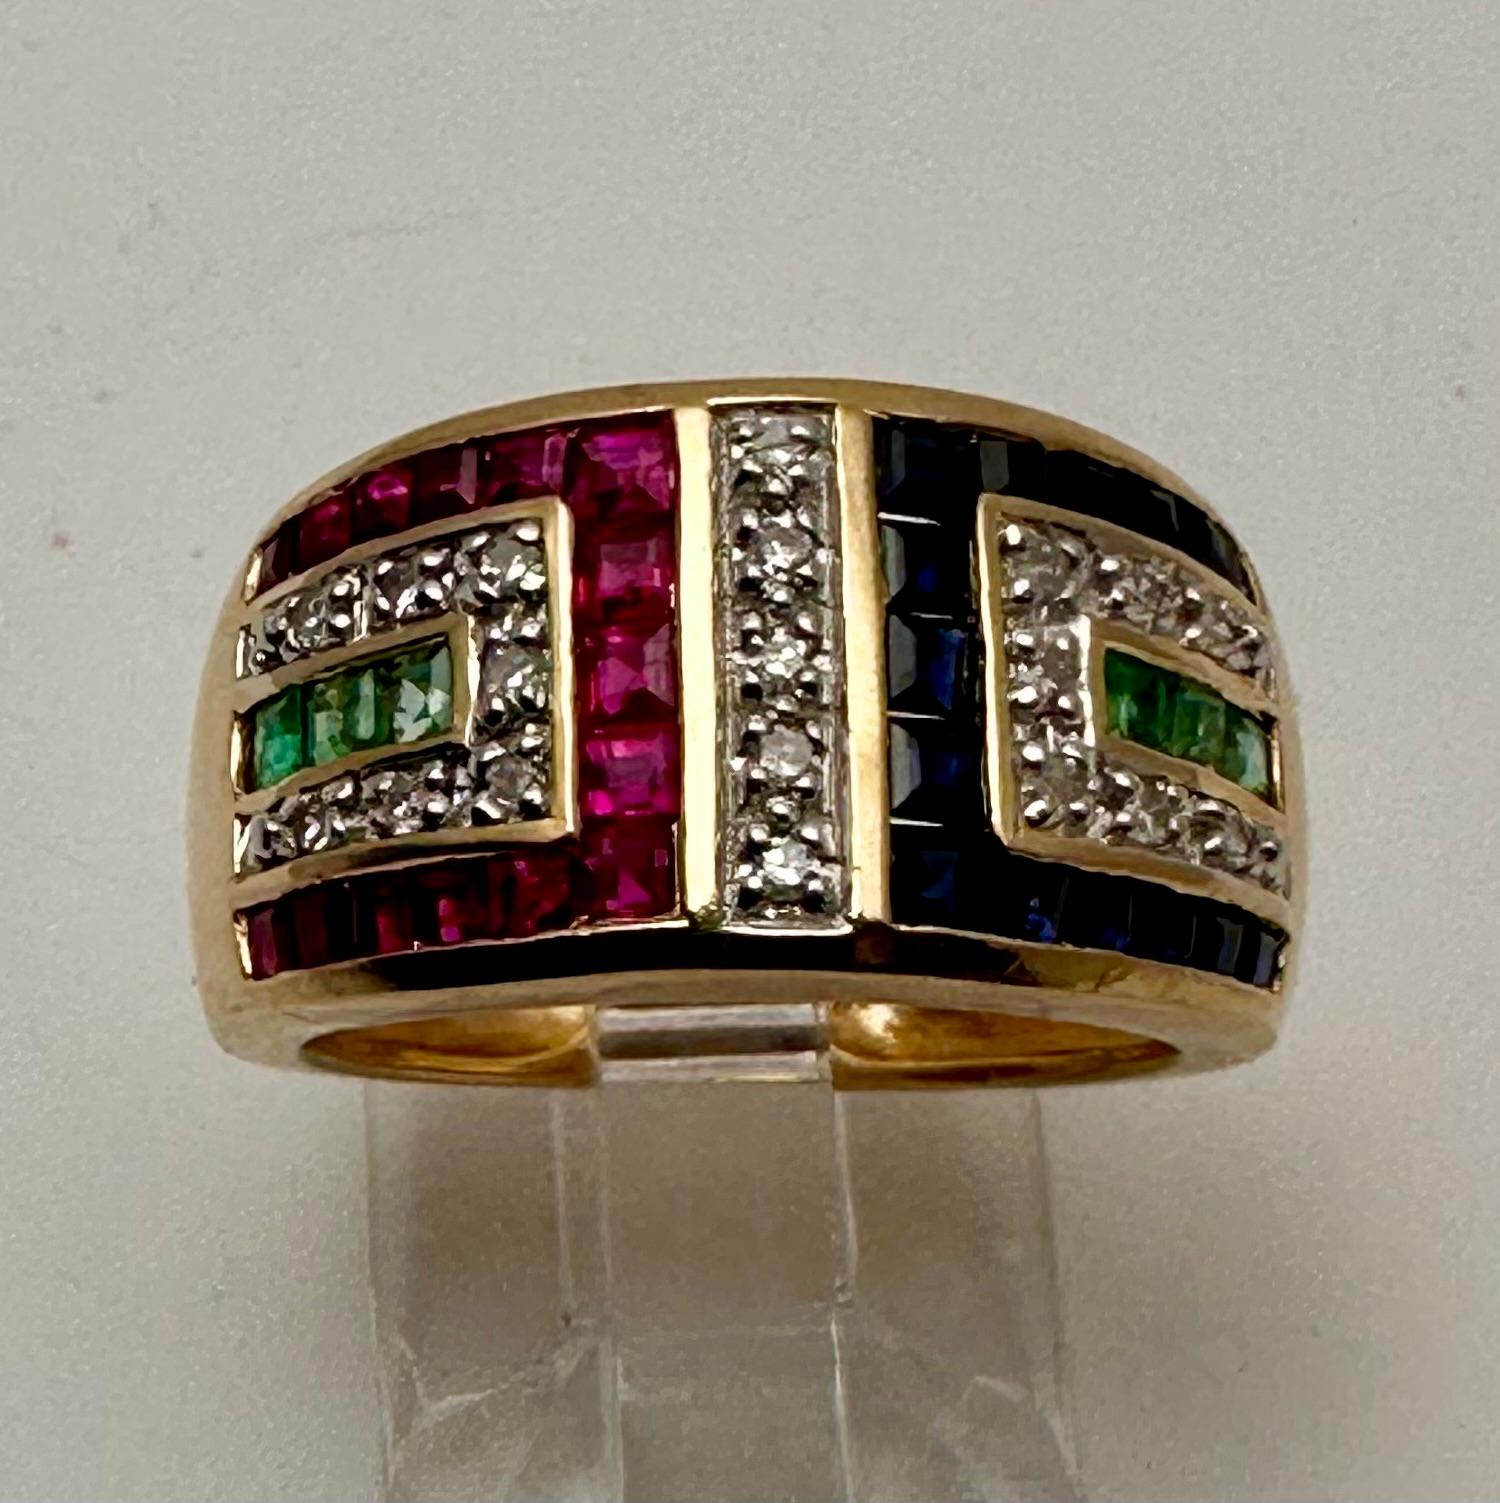 14k Yellow Gold 10.5 mm Wide Ruby Sapphire Diamond and Emerald Ring Size 11. Colored stones are princess cut and round diamonds.
RUBY
This vibrant, gem-like baby name is often associated with wealth, health, passion, and success in love, and derives